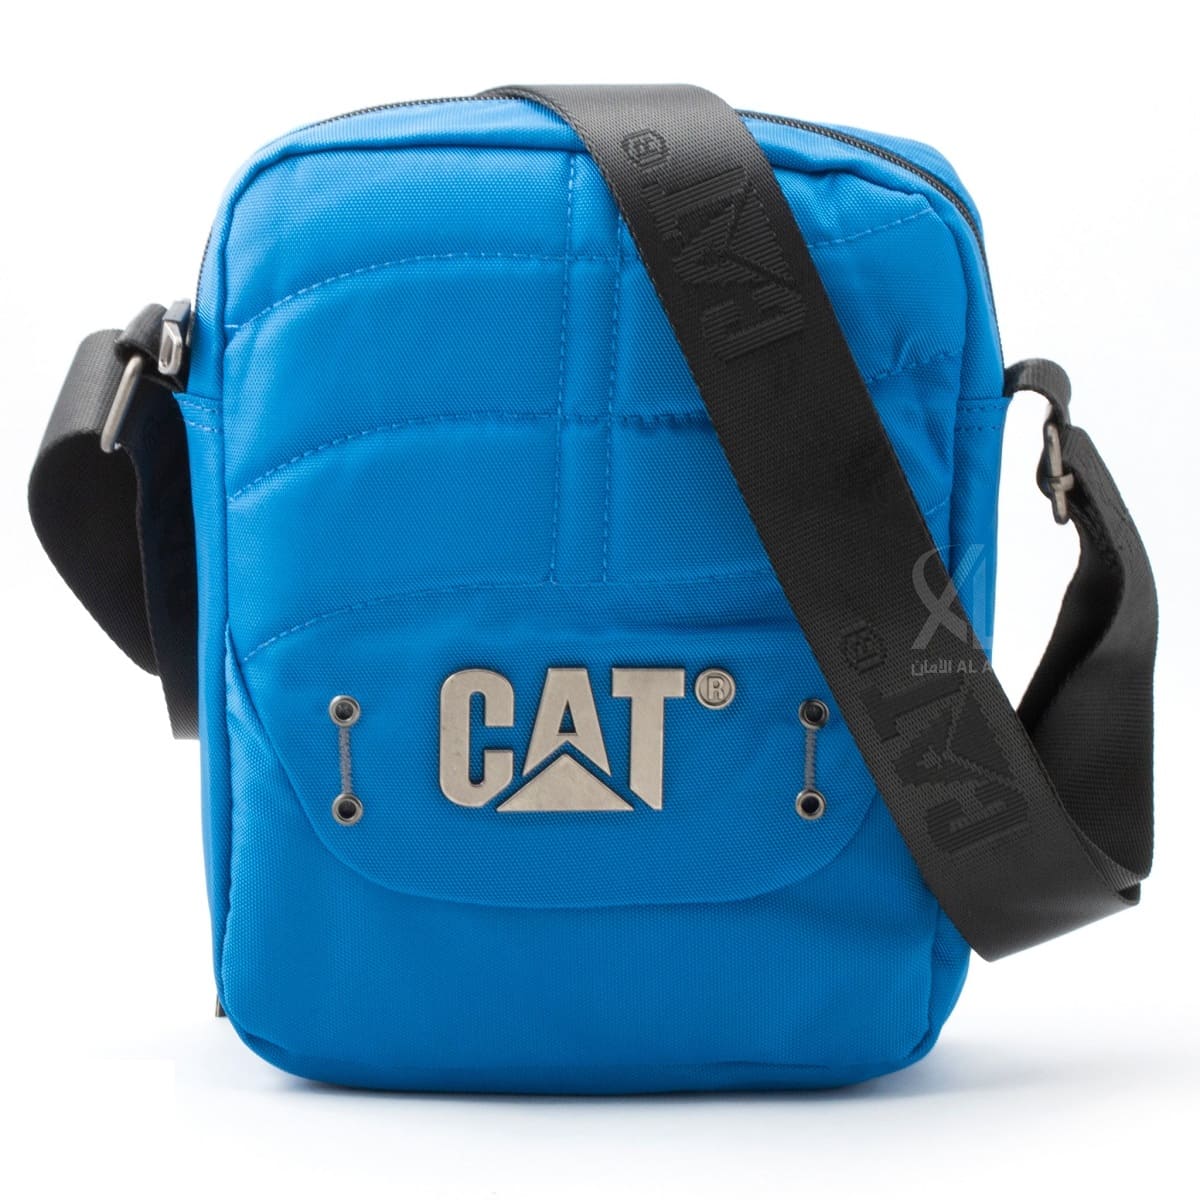 Caterpillar-crossbag-with-hand - lite-blue-color-leather-for-men